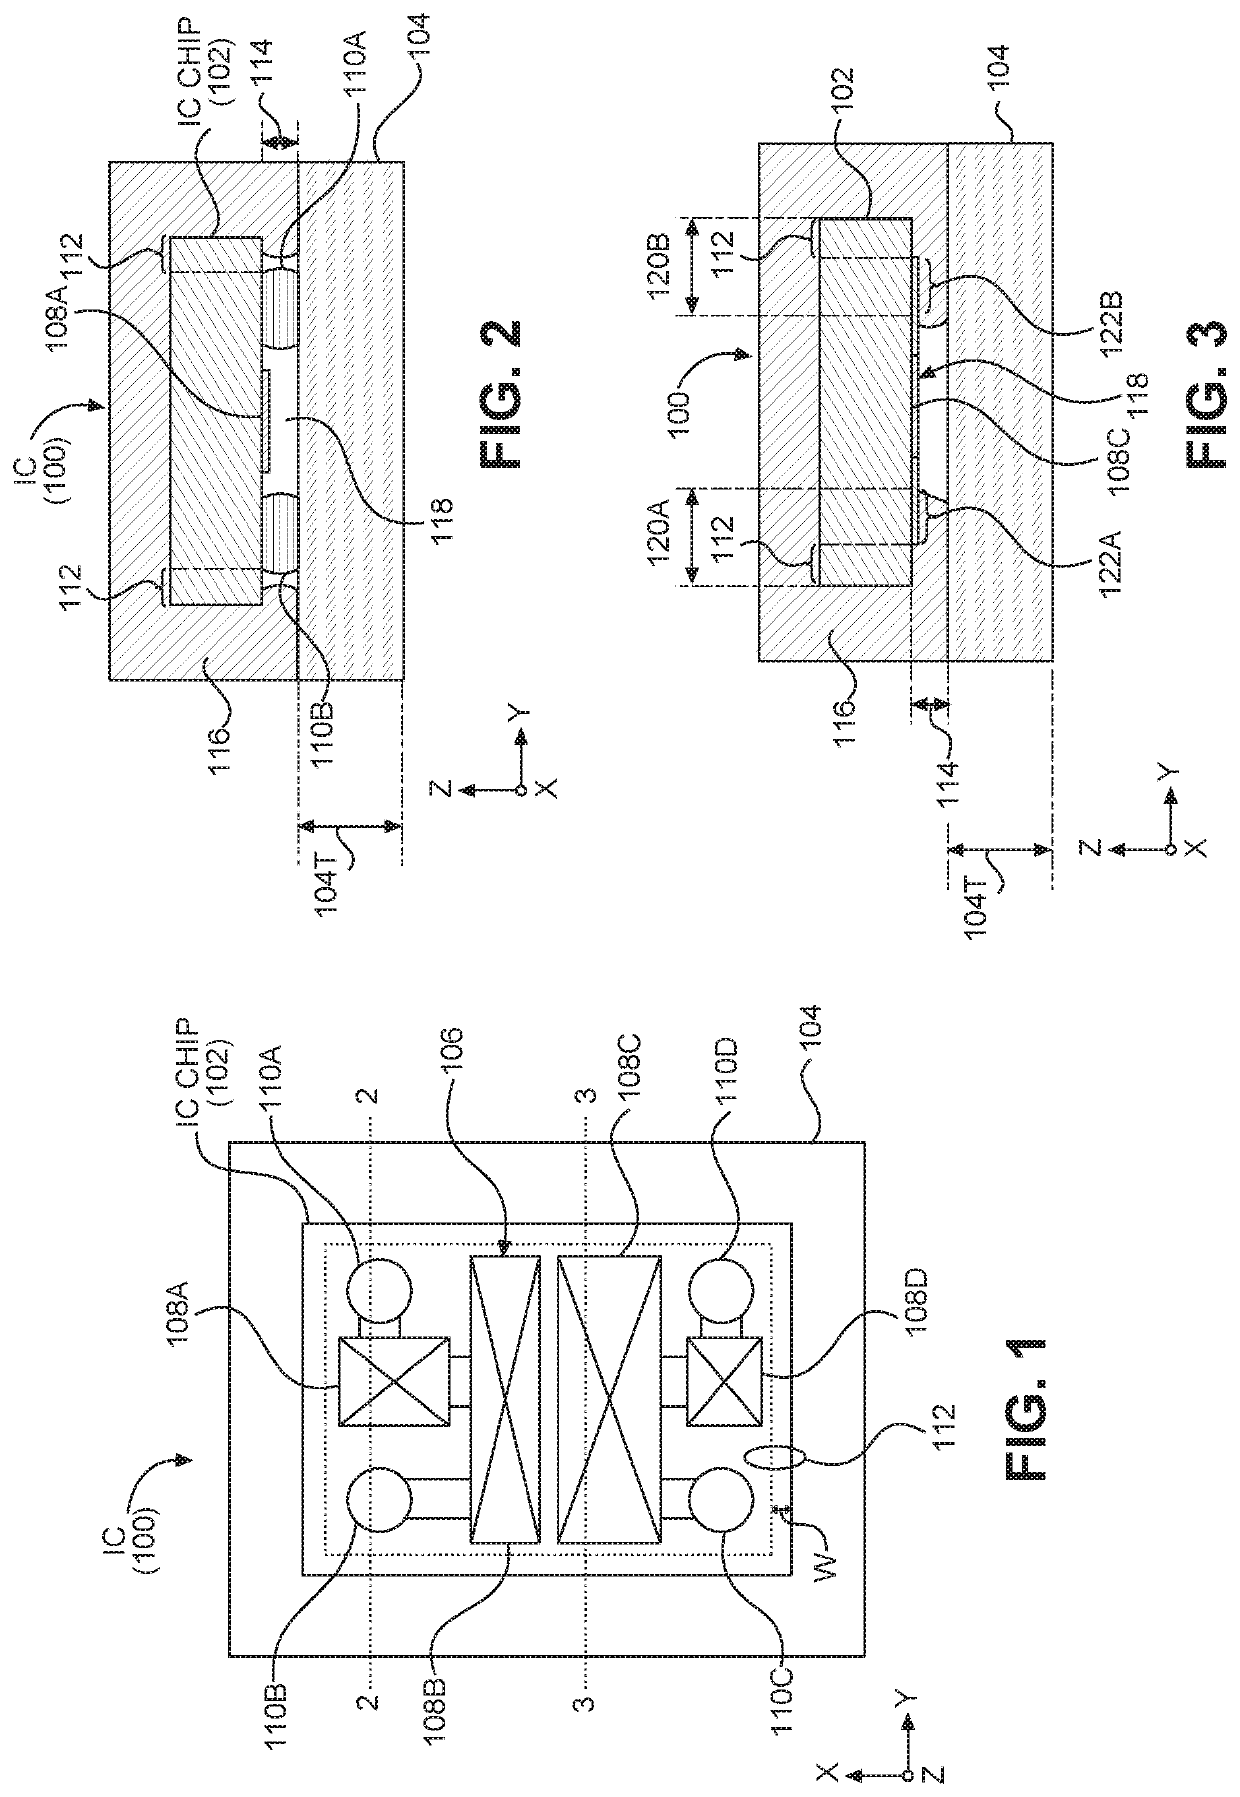 Systems and methods for packaging an acoustic device in an integrated circuit (IC)